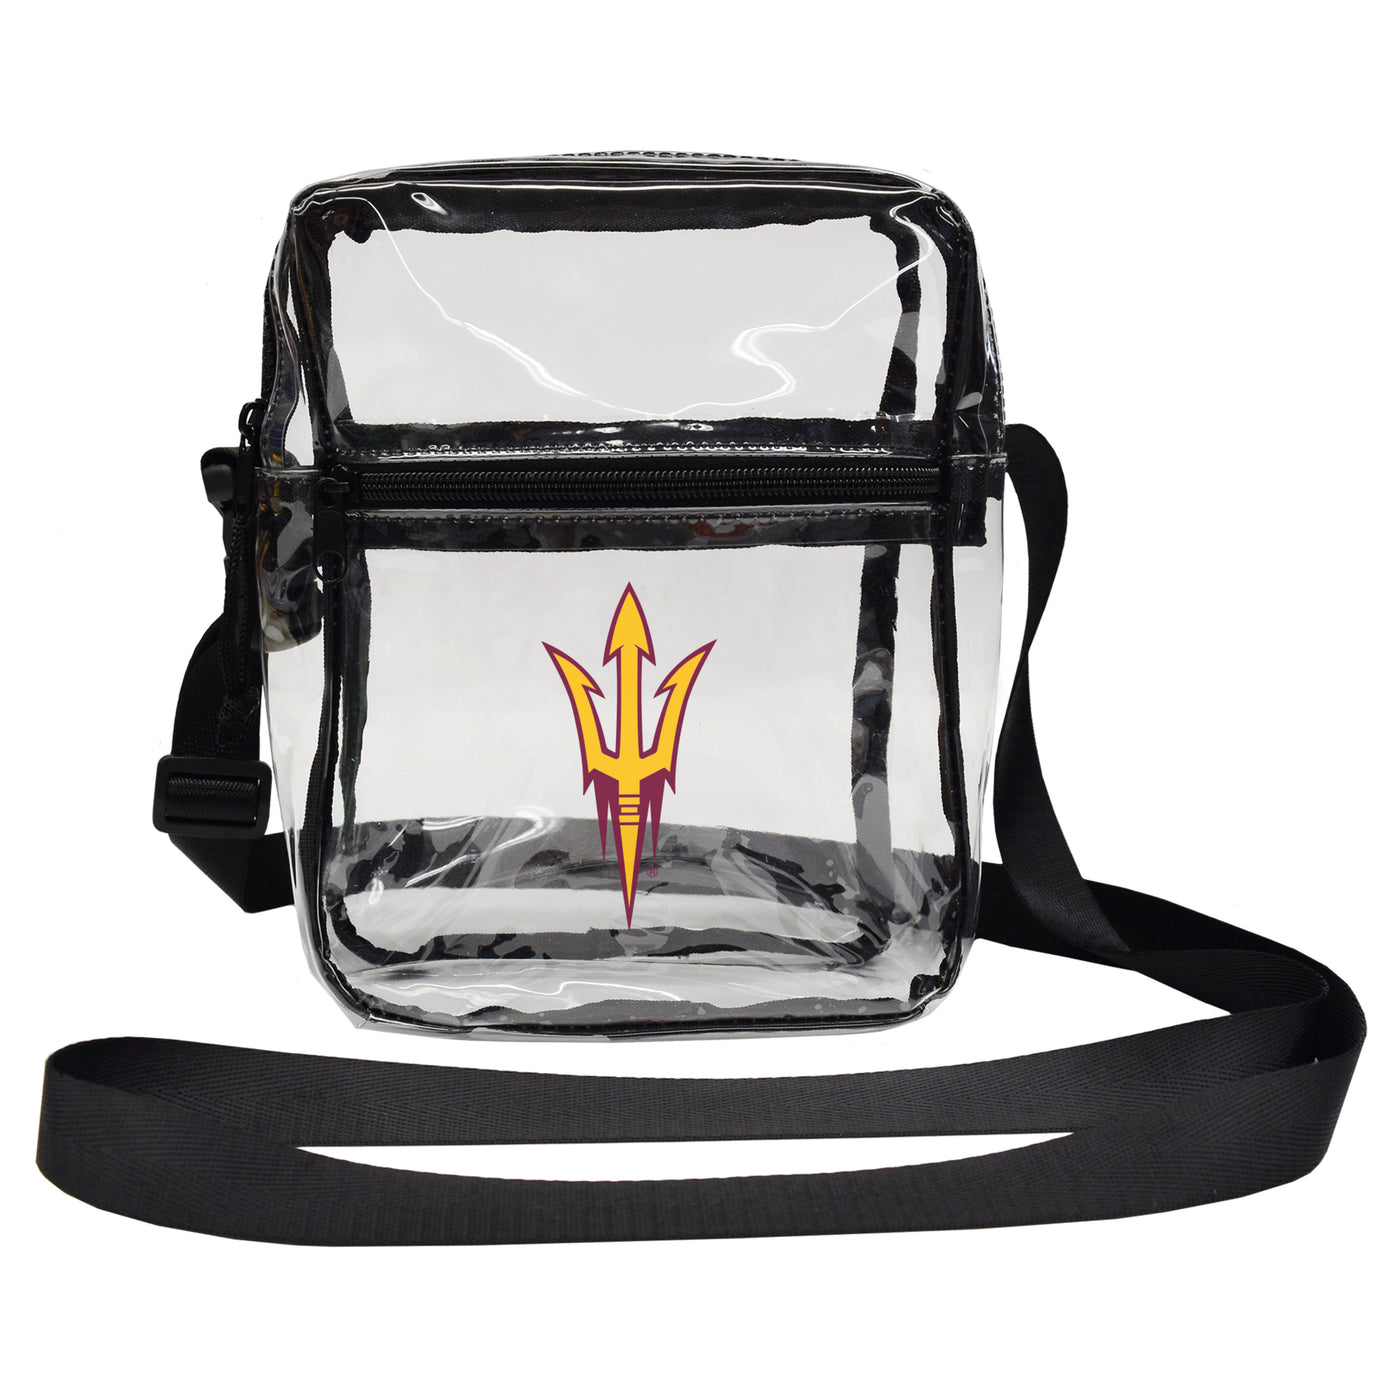 ASU clear rectangular shaped bag with black trim, strap and zipper. Gold pitchfork logo outlined in maroon on side of the bag.